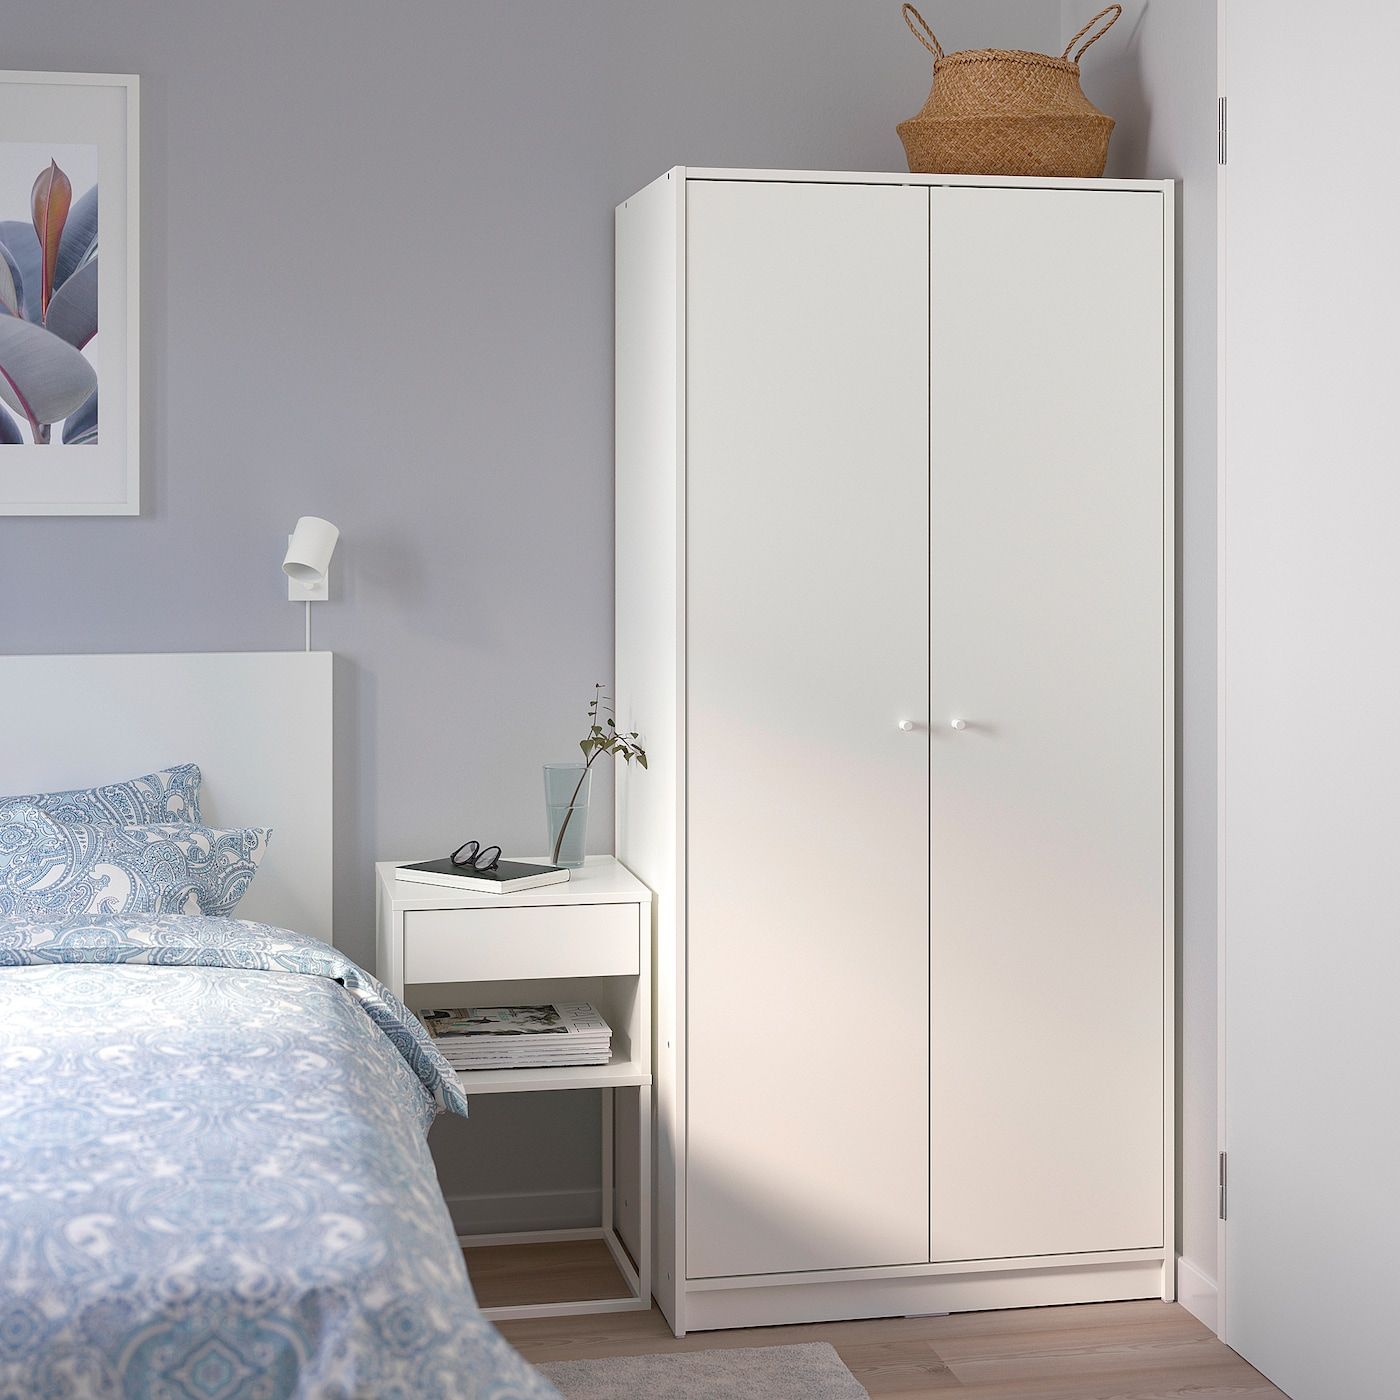 Kleppstad White, Wardrobe With 2 Doors – Ikea With Two Door White Wardrobes (Photo 1 of 15)